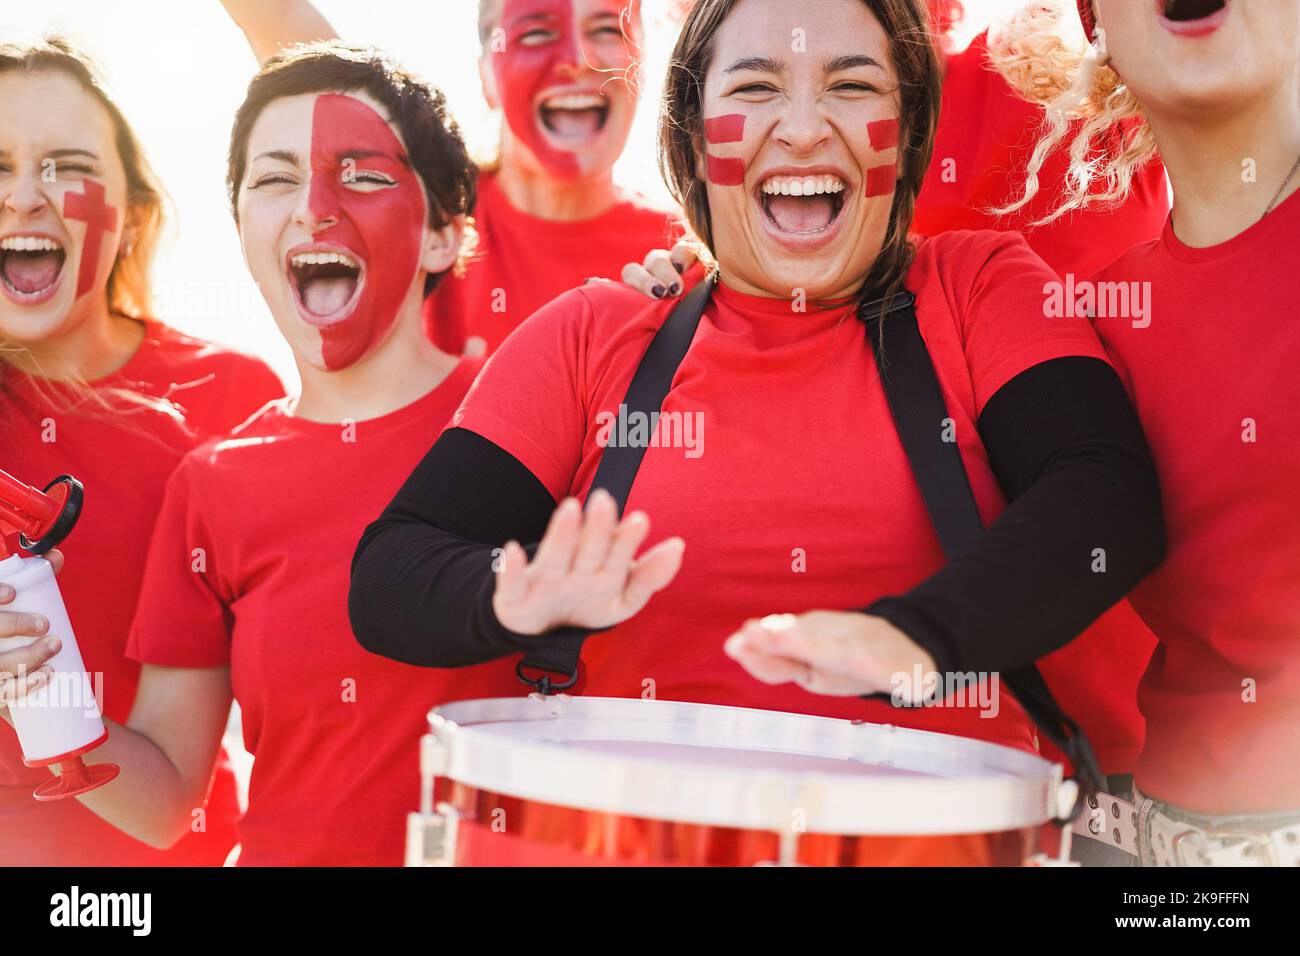 Red sport fans screaming while supporting their team - Football supporters having fun at competition event - Focus on girl playing drums Stock Photo